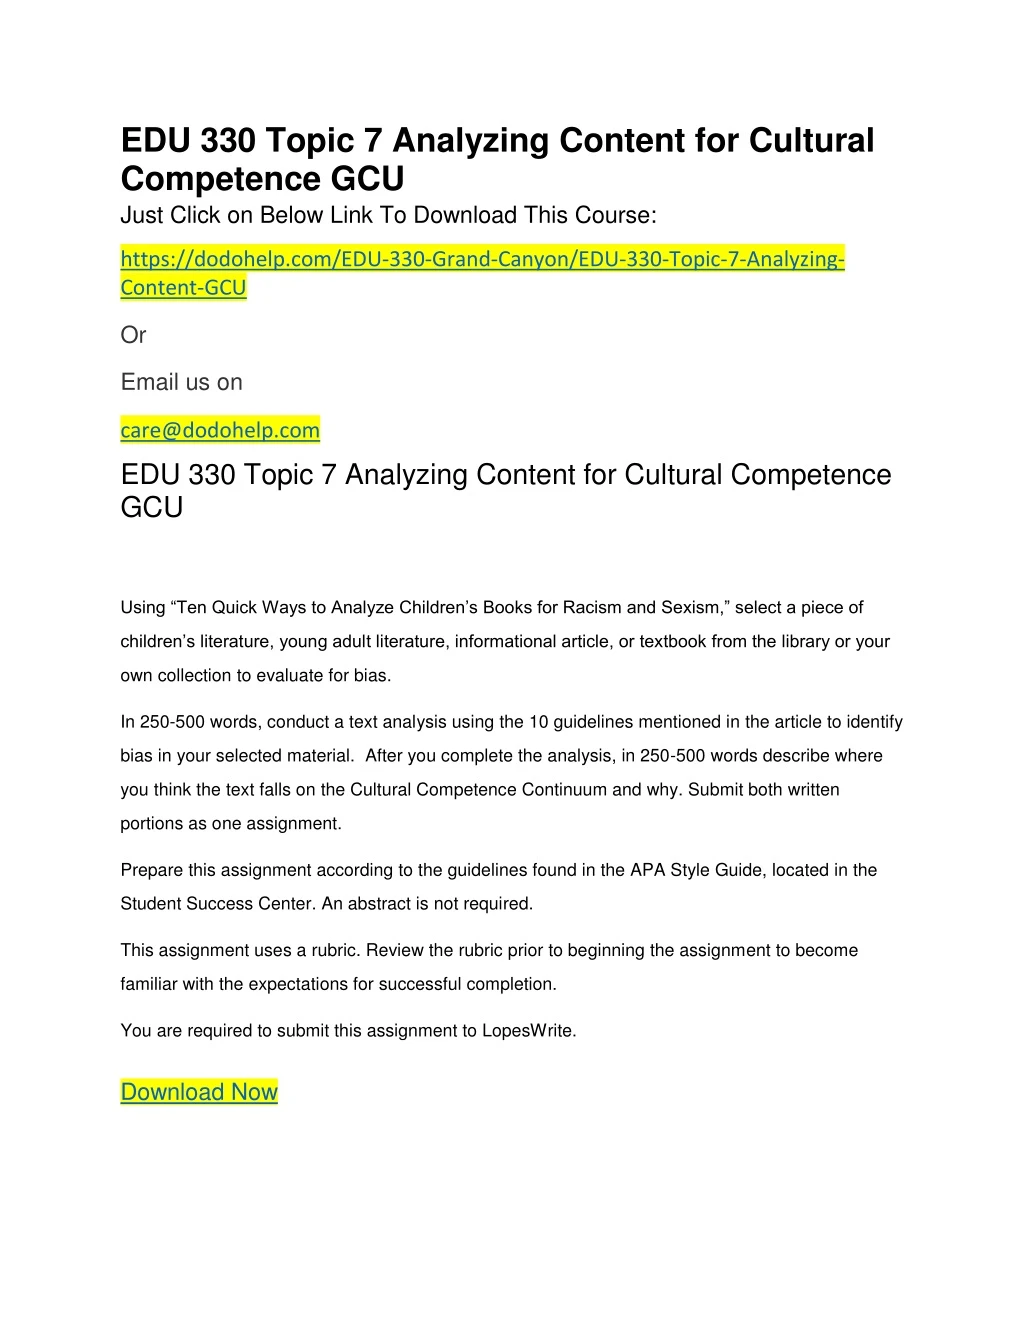 edu 330 topic 7 analyzing content for cultural